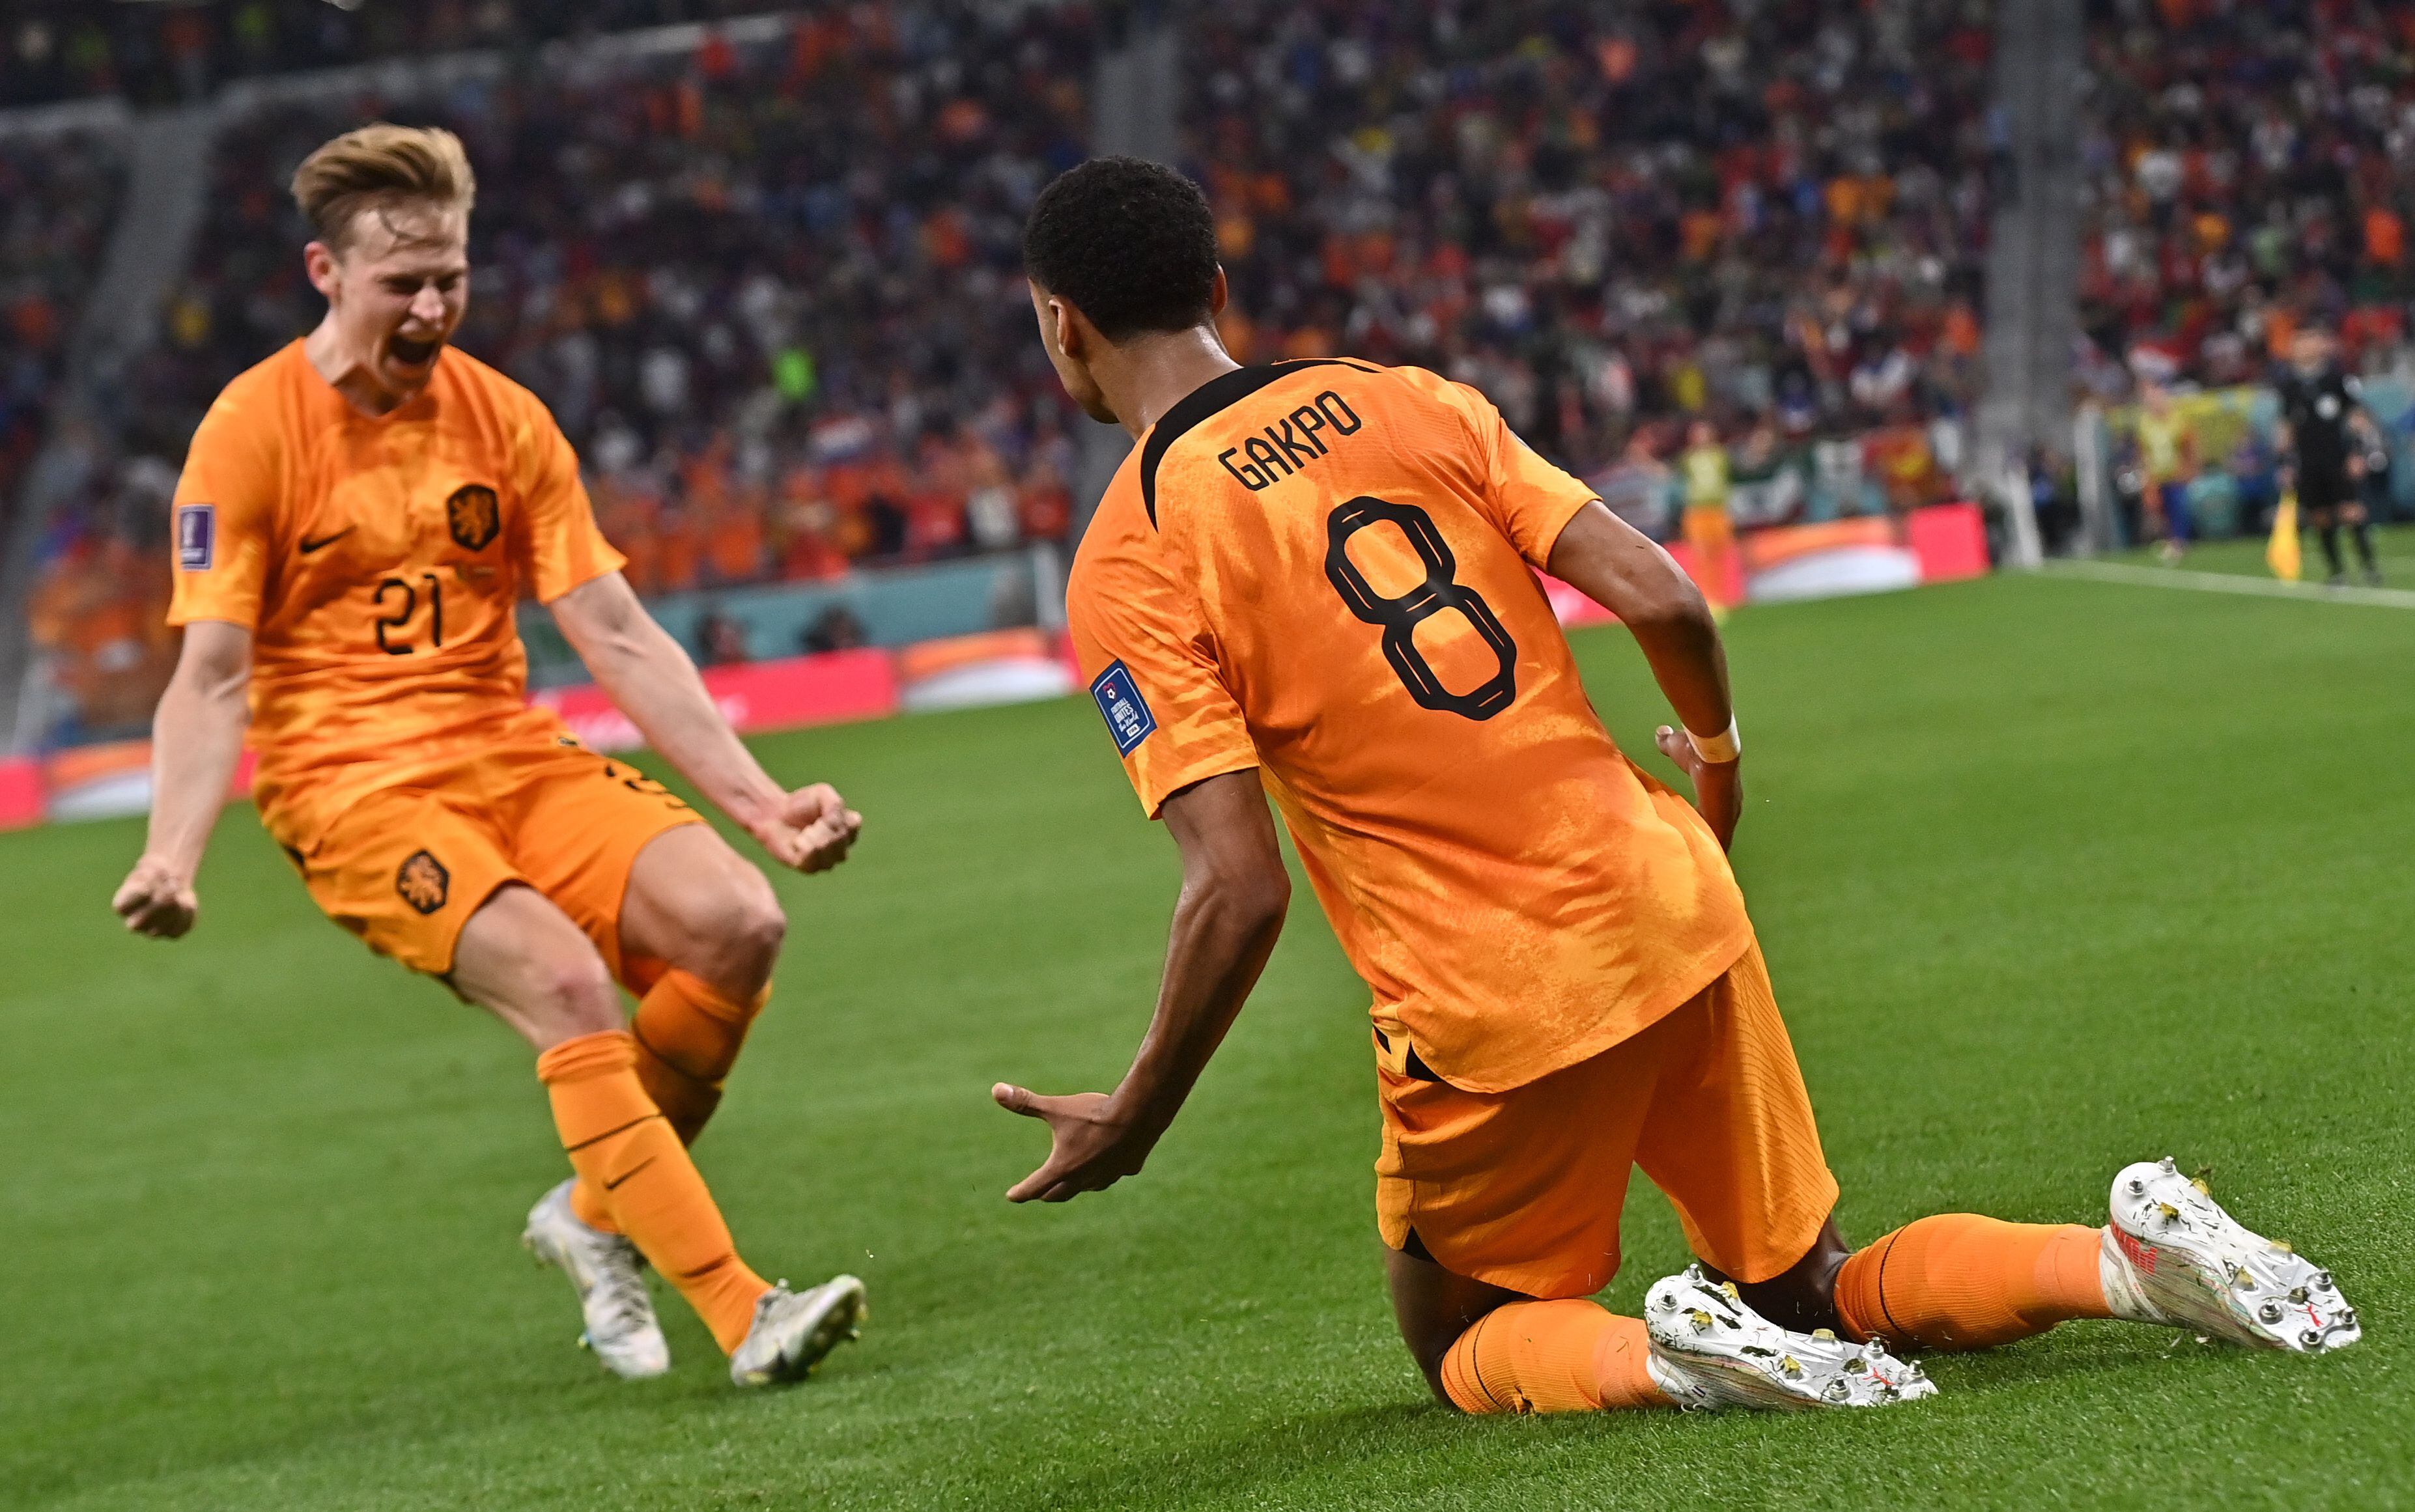 Doha (Qatar), 21/11/2022.- Cody Gakpo (R) of the Netherlands celebrates with teammate Frenkie de Jong after scoring the opening goal during the FIFA World Cup 2022 group A soccer match between Senegal and the Netherlands at Al Thumama Stadium in Doha, Qatar, 21 November 2022. (Mundial de Fútbol, Países Bajos; Holanda, Catar) EFE/EPA/Noushad Thekkayil
